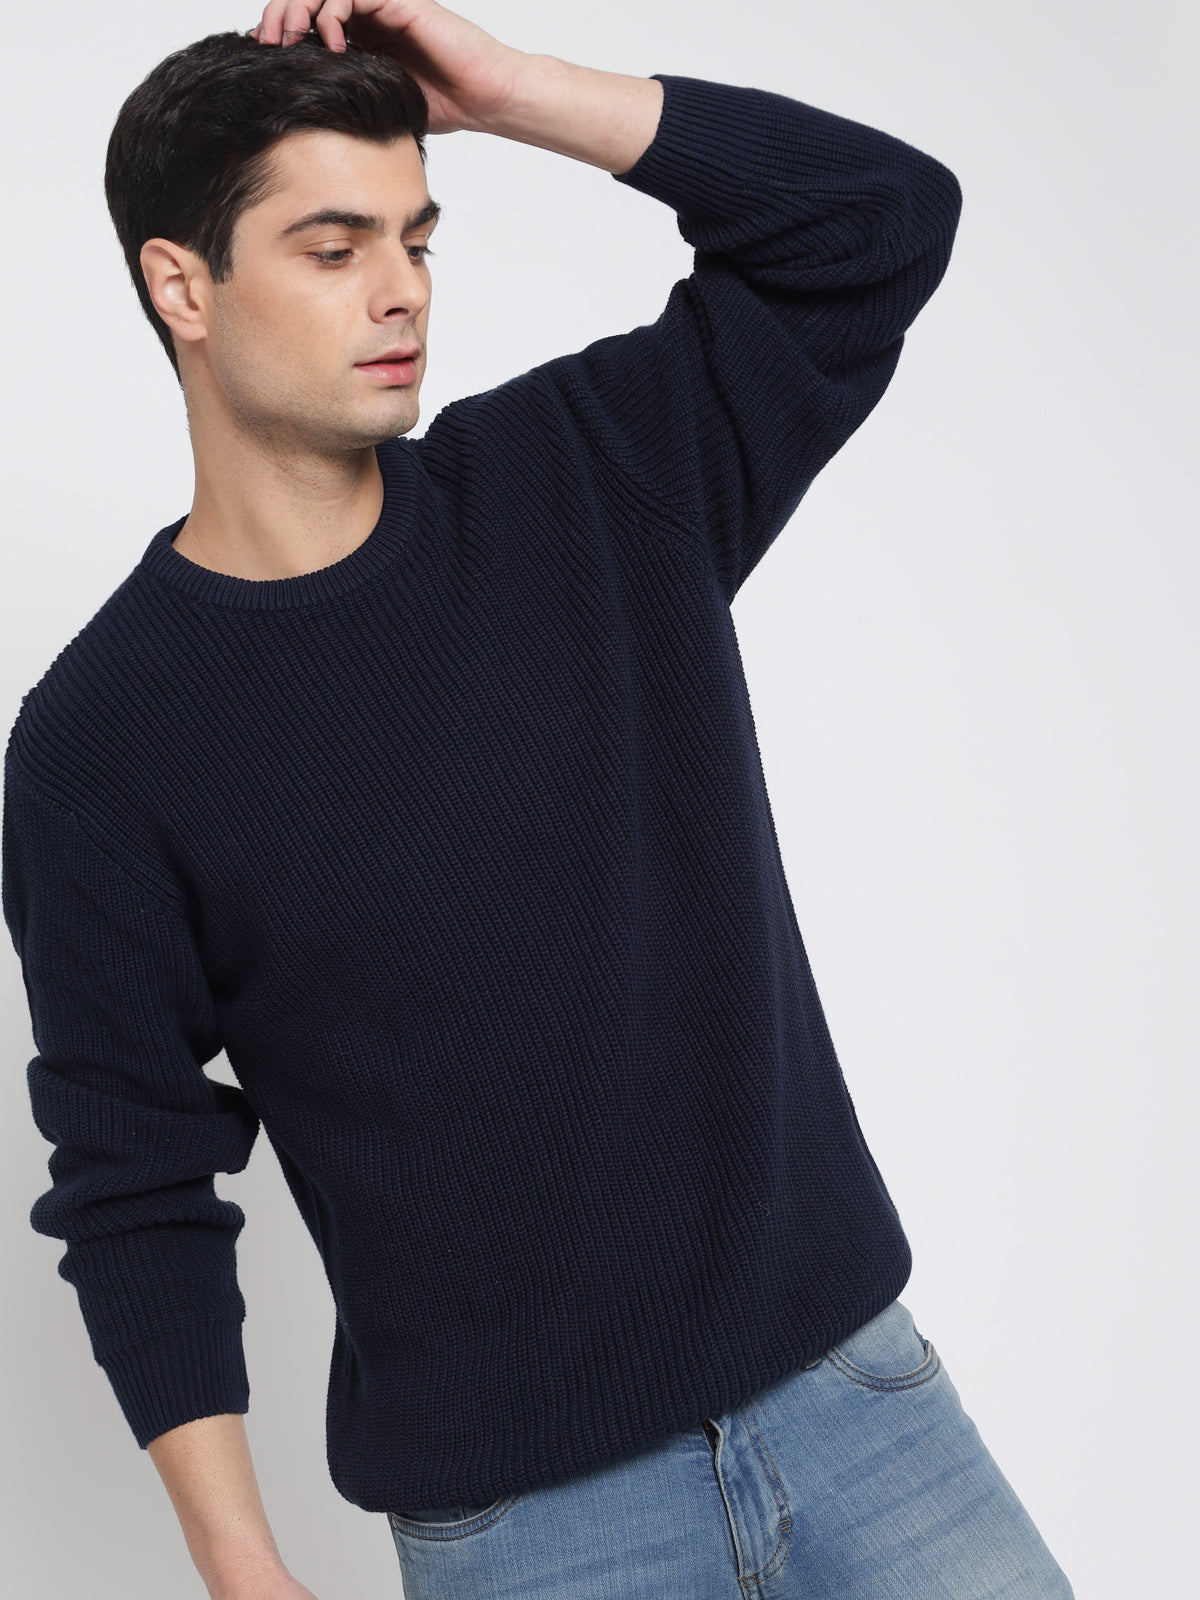 Navy Blue Purl Knit Sweater For Men 1